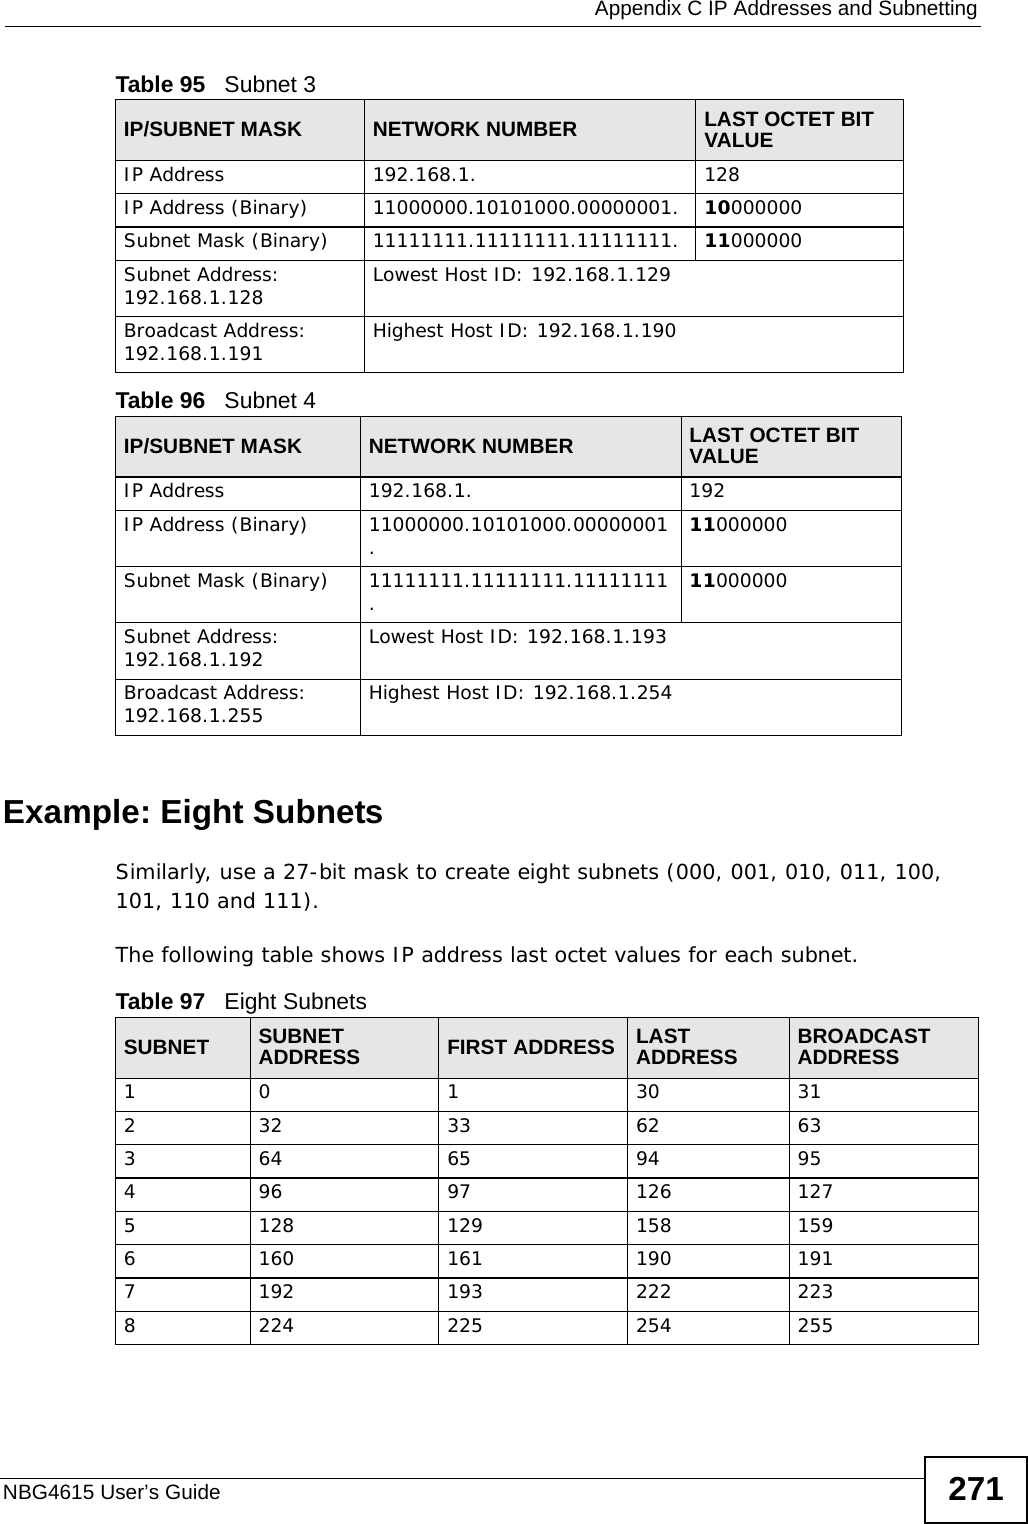  Appendix C IP Addresses and SubnettingNBG4615 User’s Guide 271Example: Eight SubnetsSimilarly, use a 27-bit mask to create eight subnets (000, 001, 010, 011, 100, 101, 110 and 111). The following table shows IP address last octet values for each subnet.Table 95   Subnet 3IP/SUBNET MASK NETWORK NUMBER LAST OCTET BIT VALUEIP Address 192.168.1. 128IP Address (Binary) 11000000.10101000.00000001. 10000000Subnet Mask (Binary) 11111111.11111111.11111111. 11000000Subnet Address: 192.168.1.128 Lowest Host ID: 192.168.1.129Broadcast Address: 192.168.1.191 Highest Host ID: 192.168.1.190Table 96   Subnet 4IP/SUBNET MASK NETWORK NUMBER LAST OCTET BIT VALUEIP Address 192.168.1. 192IP Address (Binary) 11000000.10101000.00000001. 11000000Subnet Mask (Binary) 11111111.11111111.11111111. 11000000Subnet Address: 192.168.1.192 Lowest Host ID: 192.168.1.193Broadcast Address: 192.168.1.255 Highest Host ID: 192.168.1.254Table 97   Eight SubnetsSUBNET SUBNET ADDRESS FIRST ADDRESS LAST ADDRESS BROADCAST ADDRESS1 0 1 30 31232 33 62 63364 65 94 95496 97 126 1275128 129 158 1596160 161 190 1917192 193 222 2238224 225 254 255